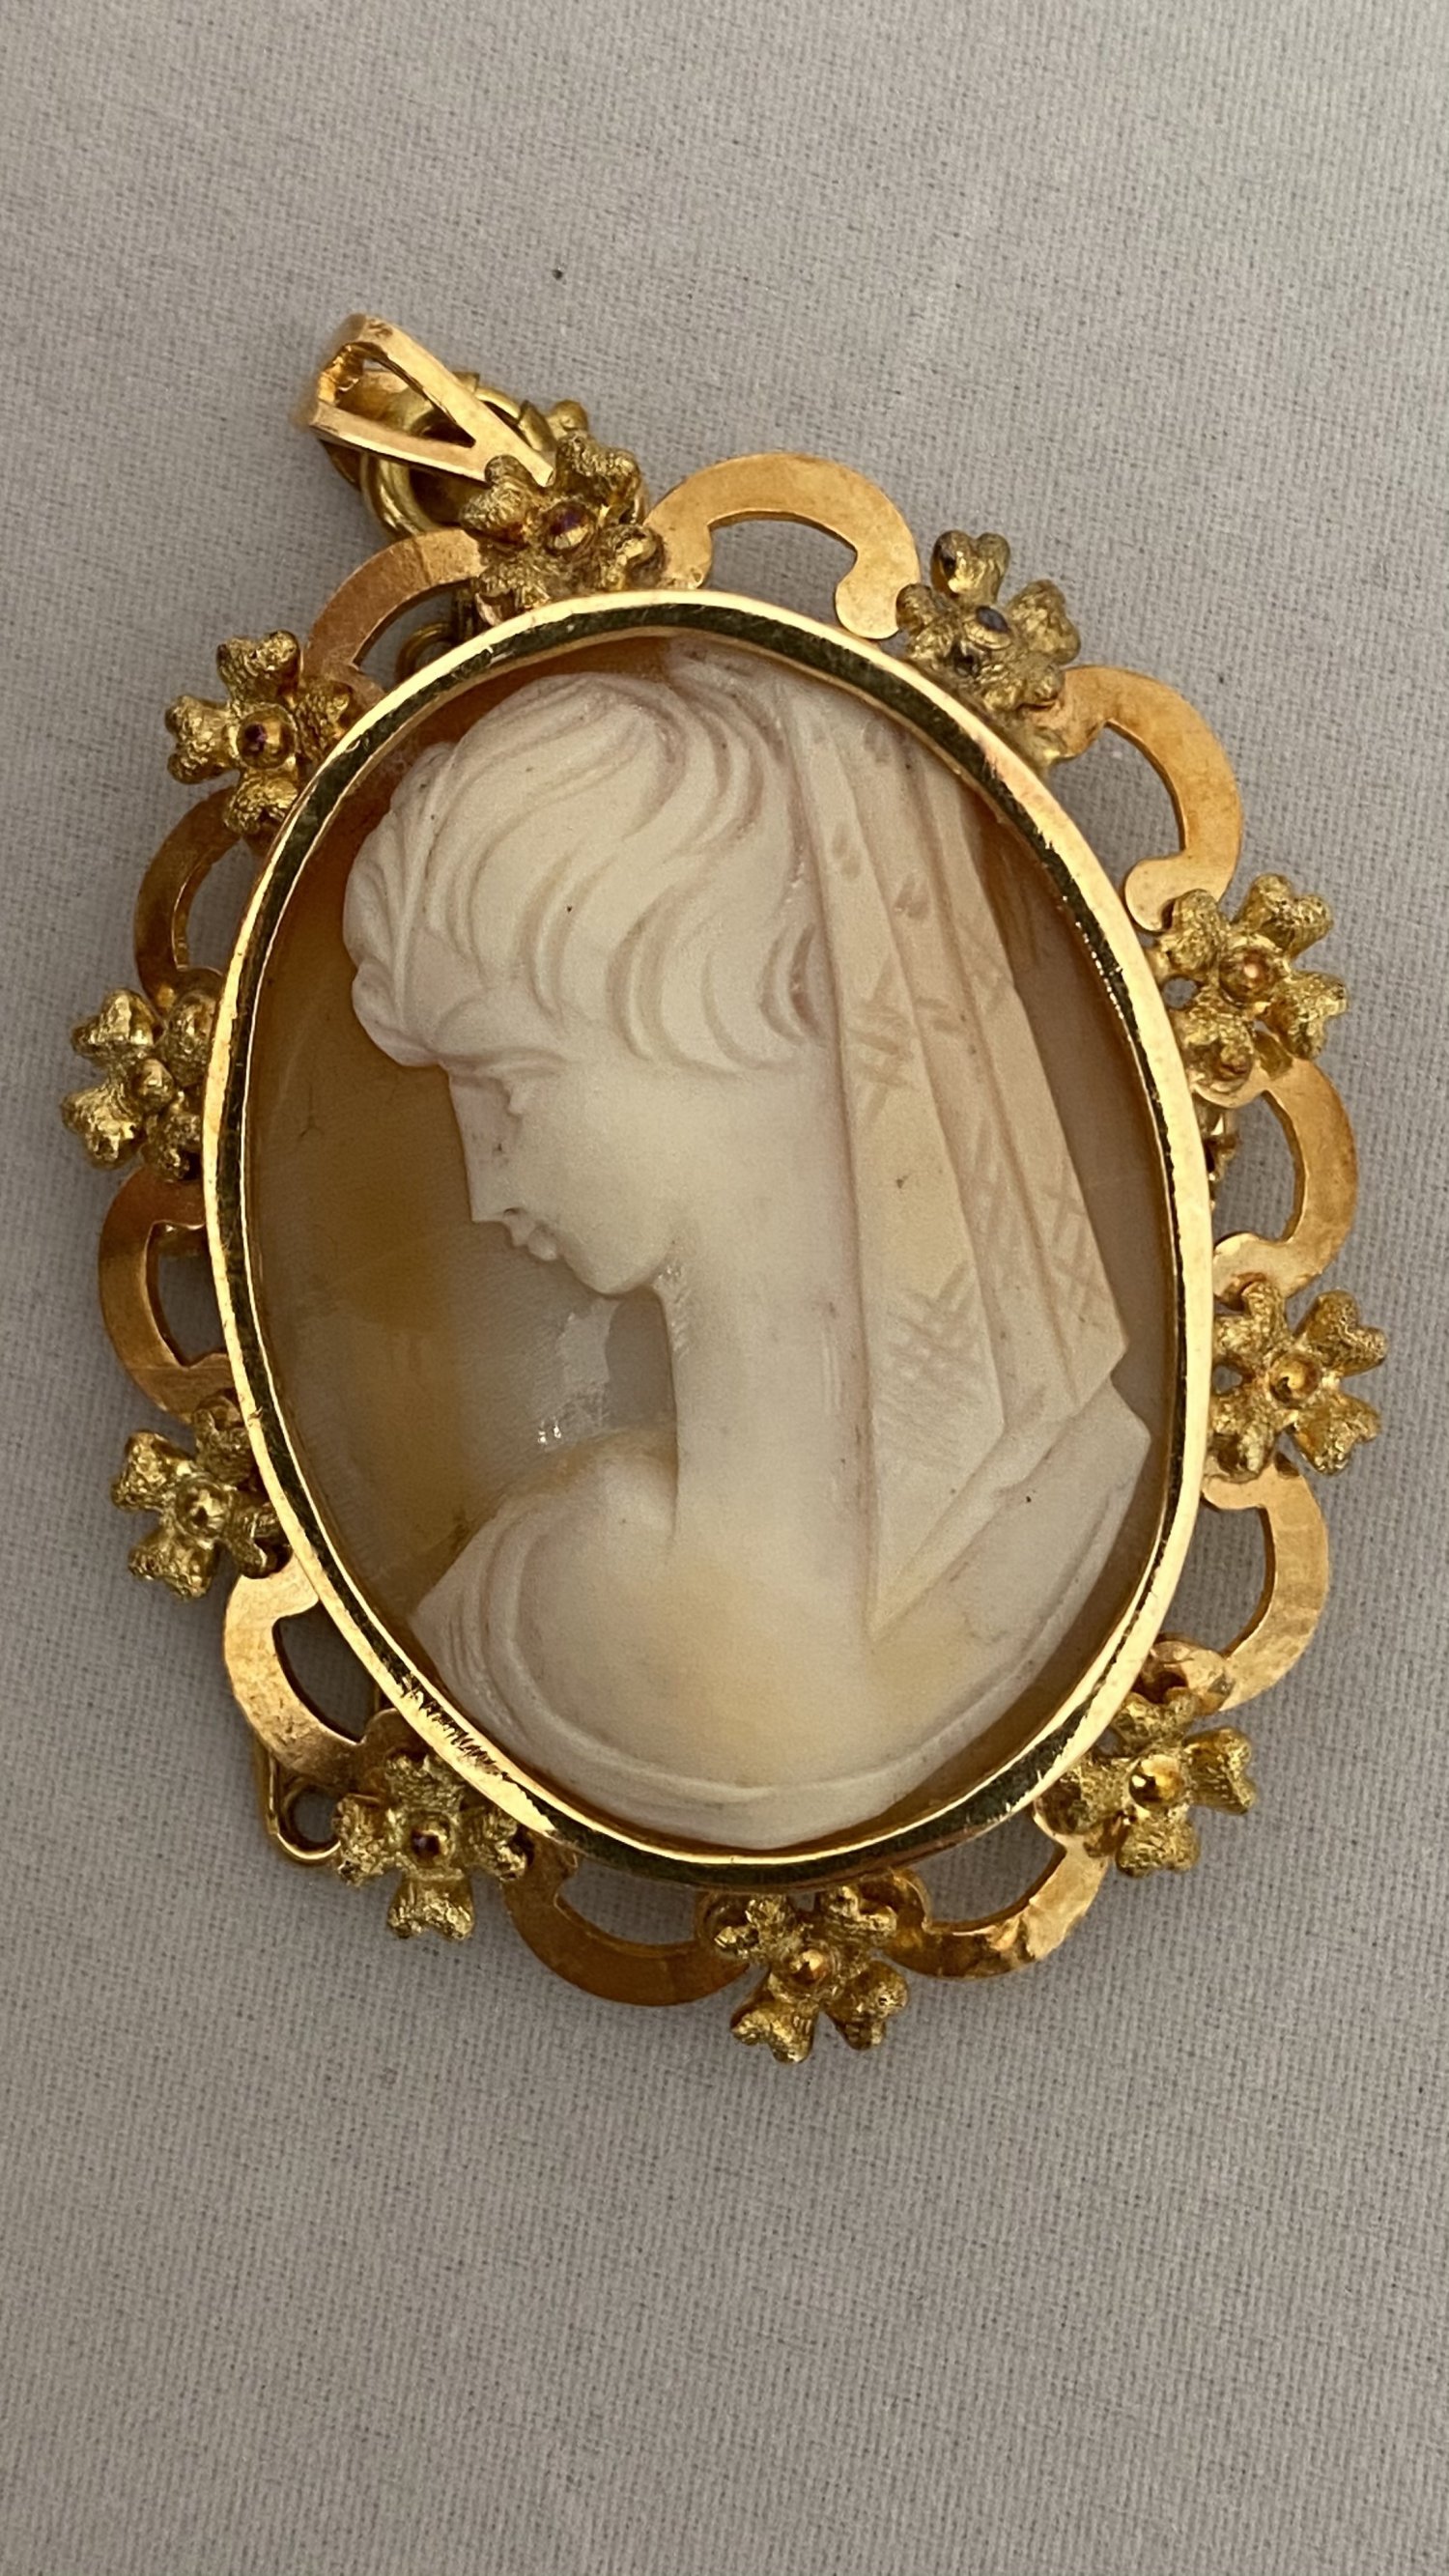 Italy 725 Gold Cameo Brooch c.1950 | Antiquarian | Australian Antique ...